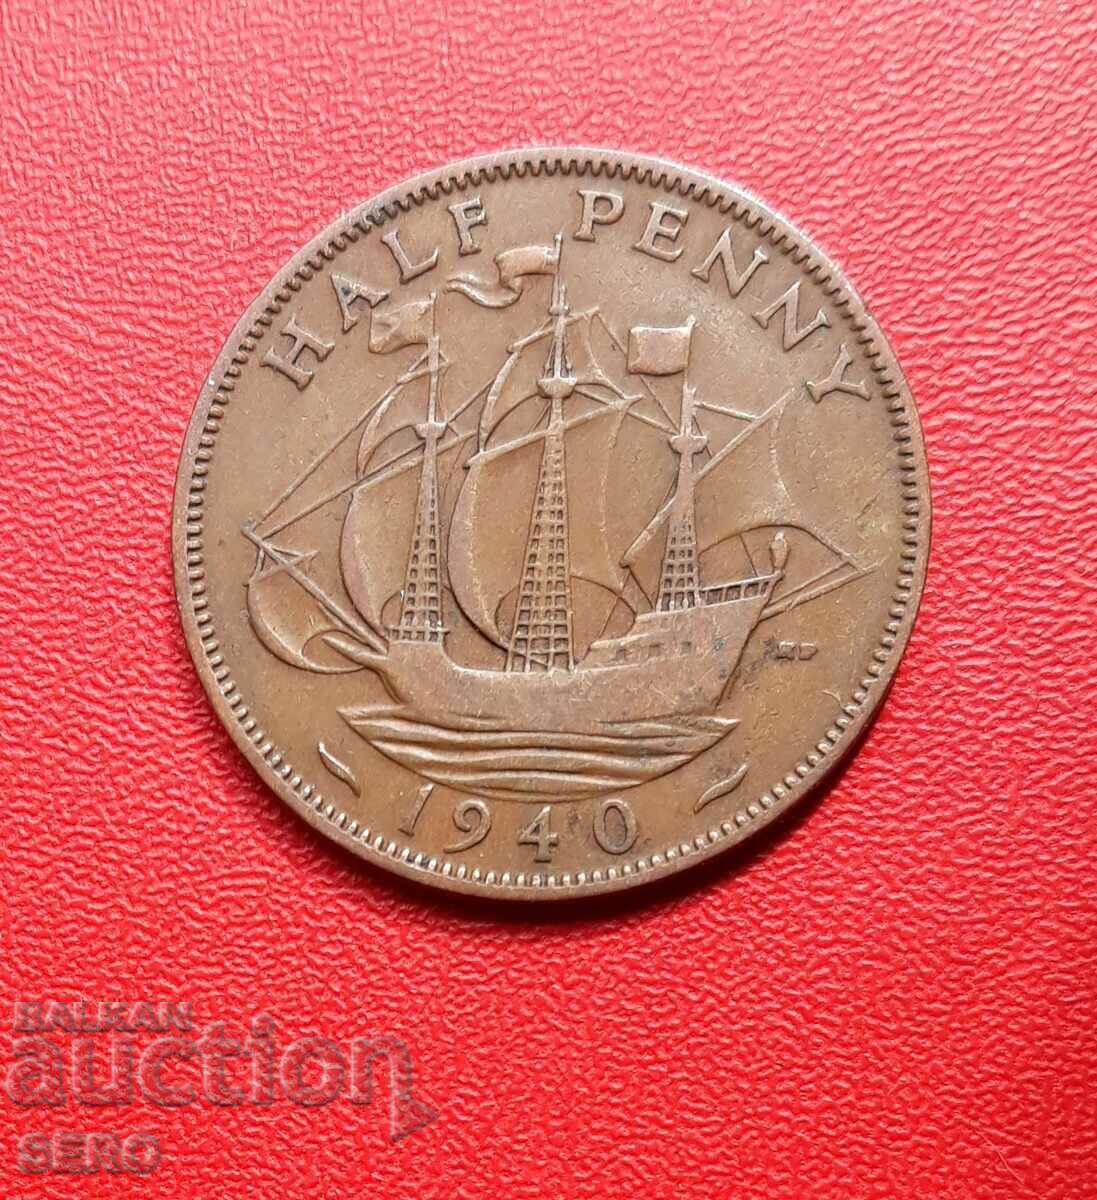 Great Britain - 1/2 penny 1940